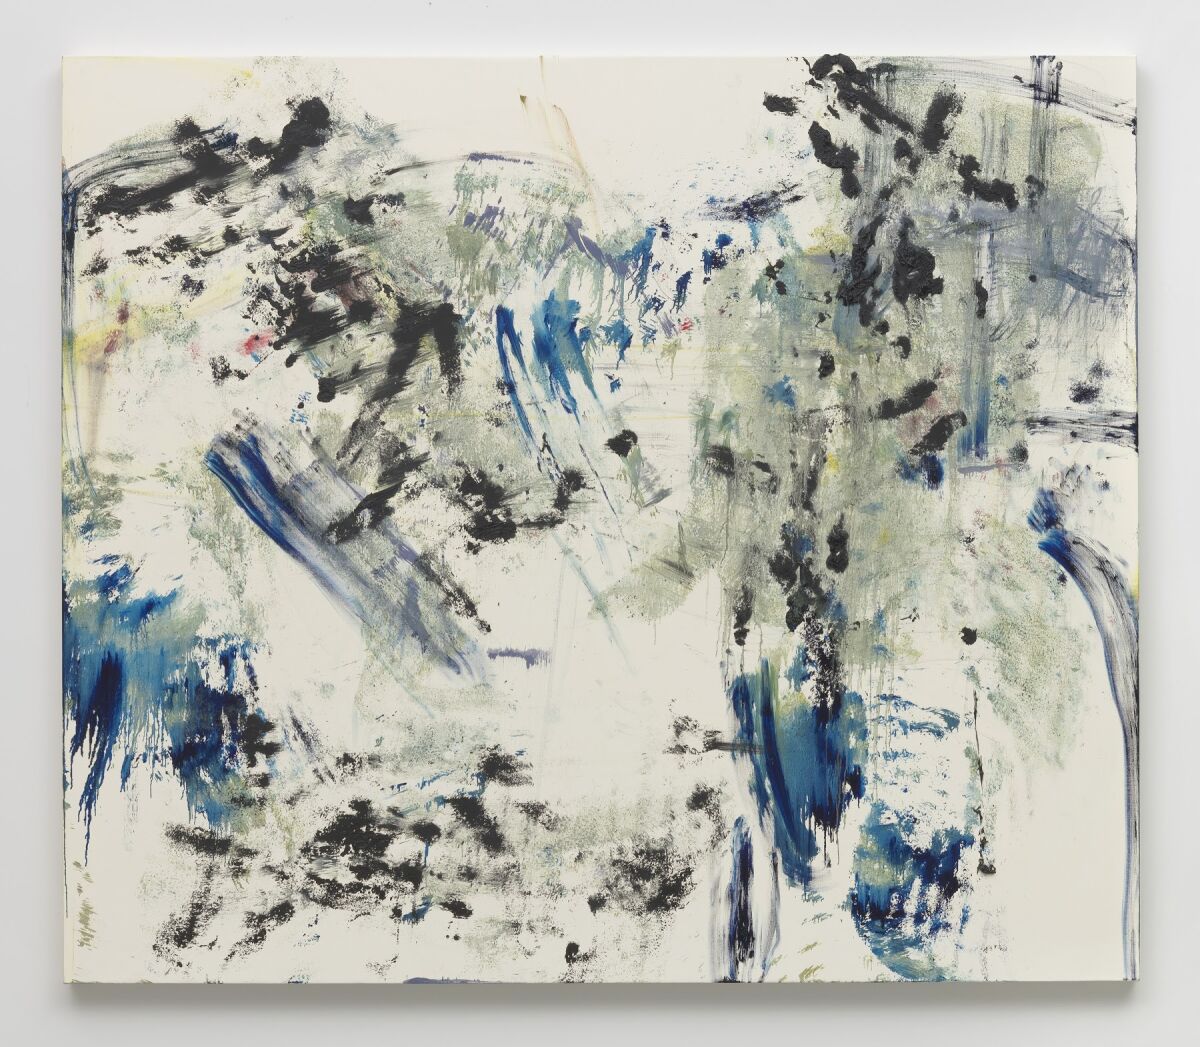 "Like Air I'll Rise" by Louise Fishman, 2018. Oil on linen, 74 inches by 86 inches.